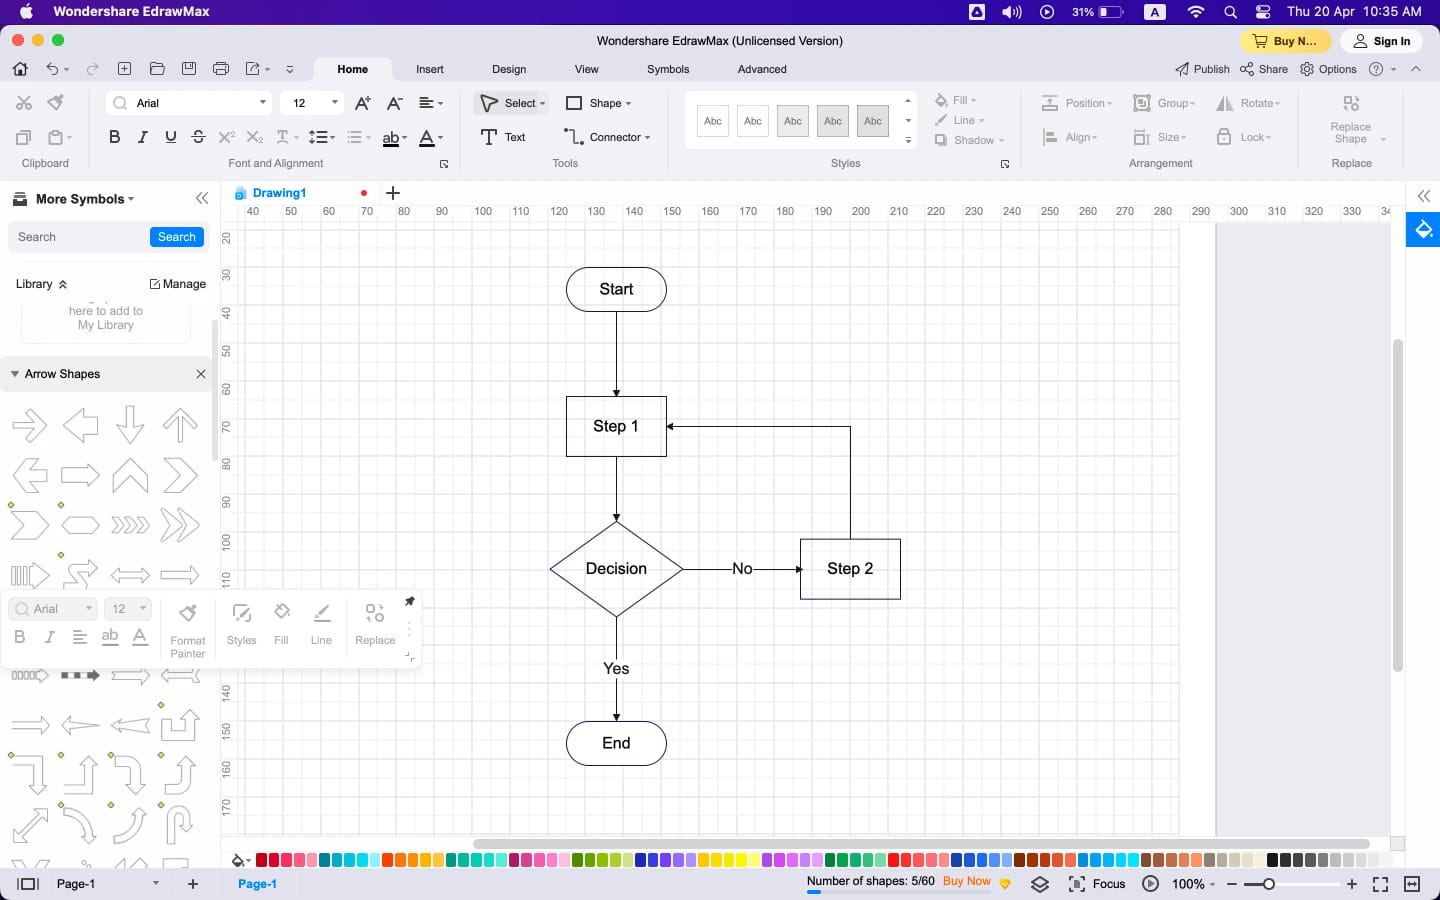 build the structure of flowchart